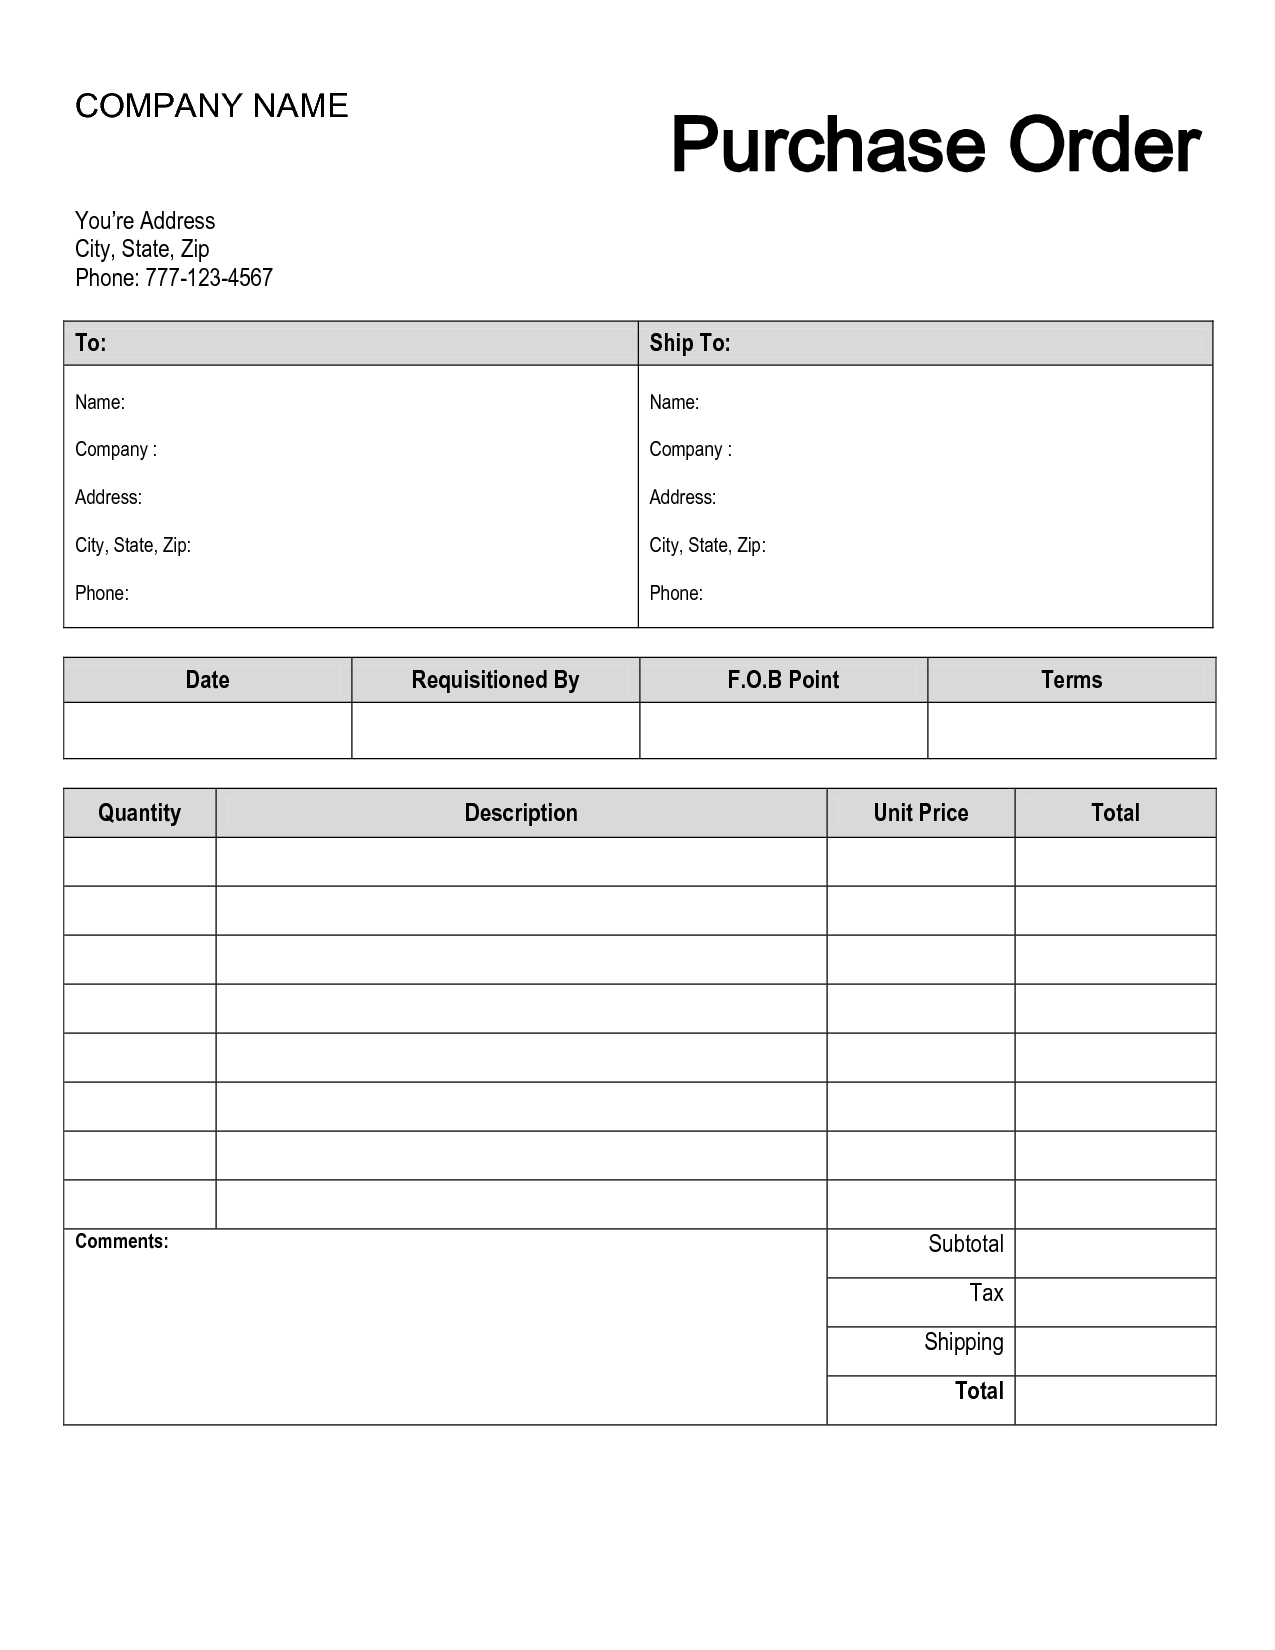 Free Printable Purchase Order Form | Purchase Order | Shop | Order - Free Printable Work Order Template